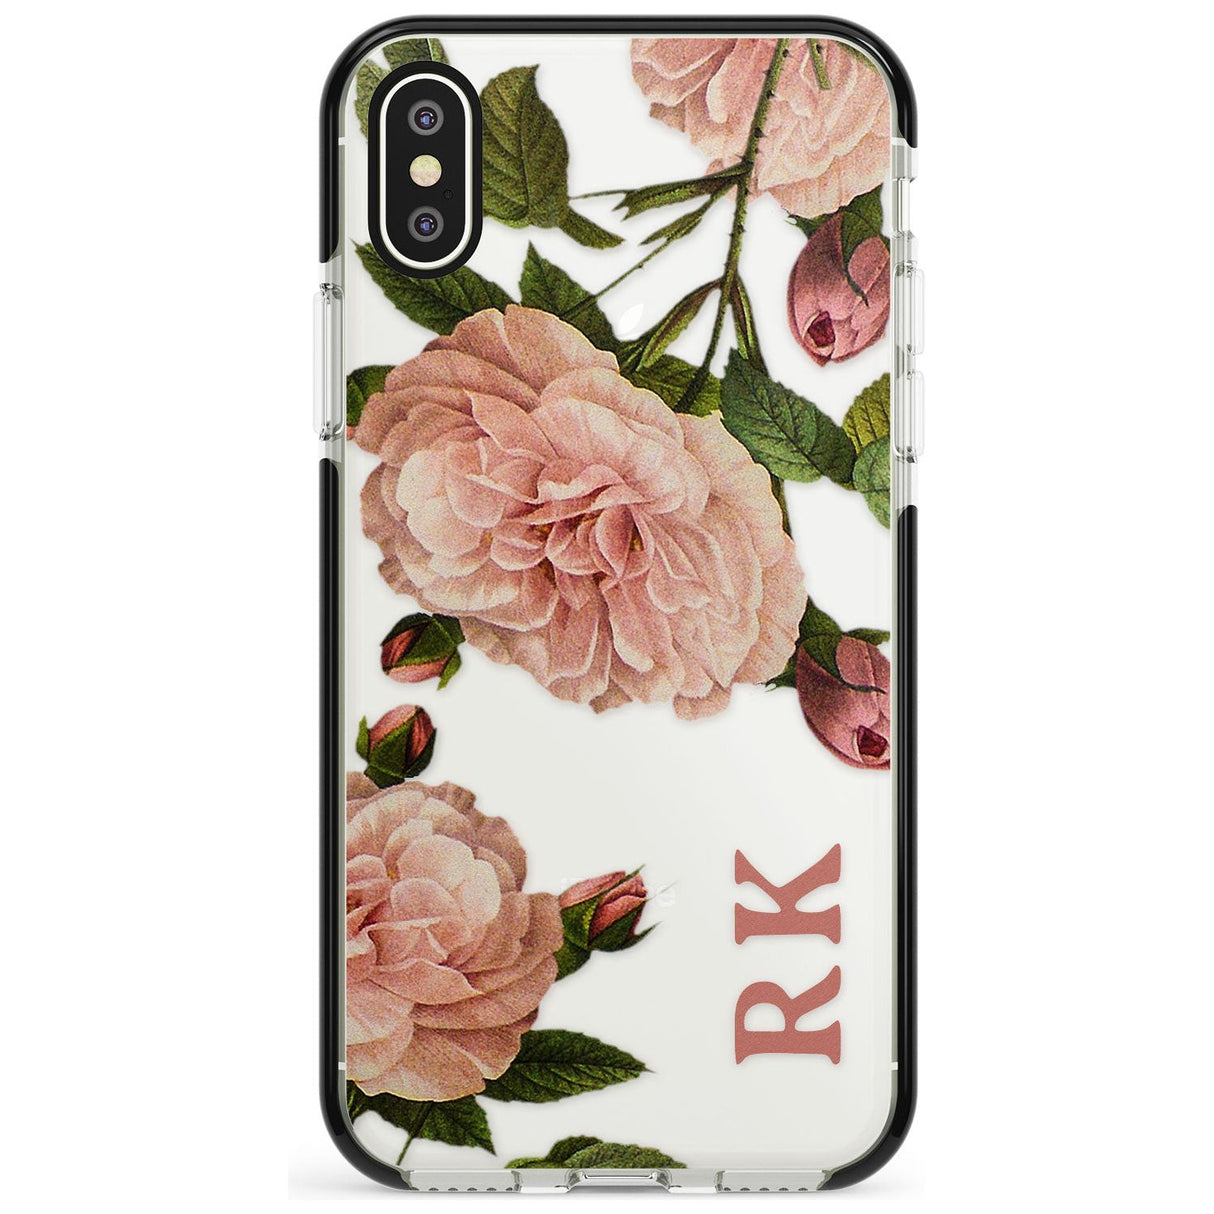 Custom Clear Vintage Floral Pale Pink Peonies Black Impact Phone Case for iPhone X XS Max XR